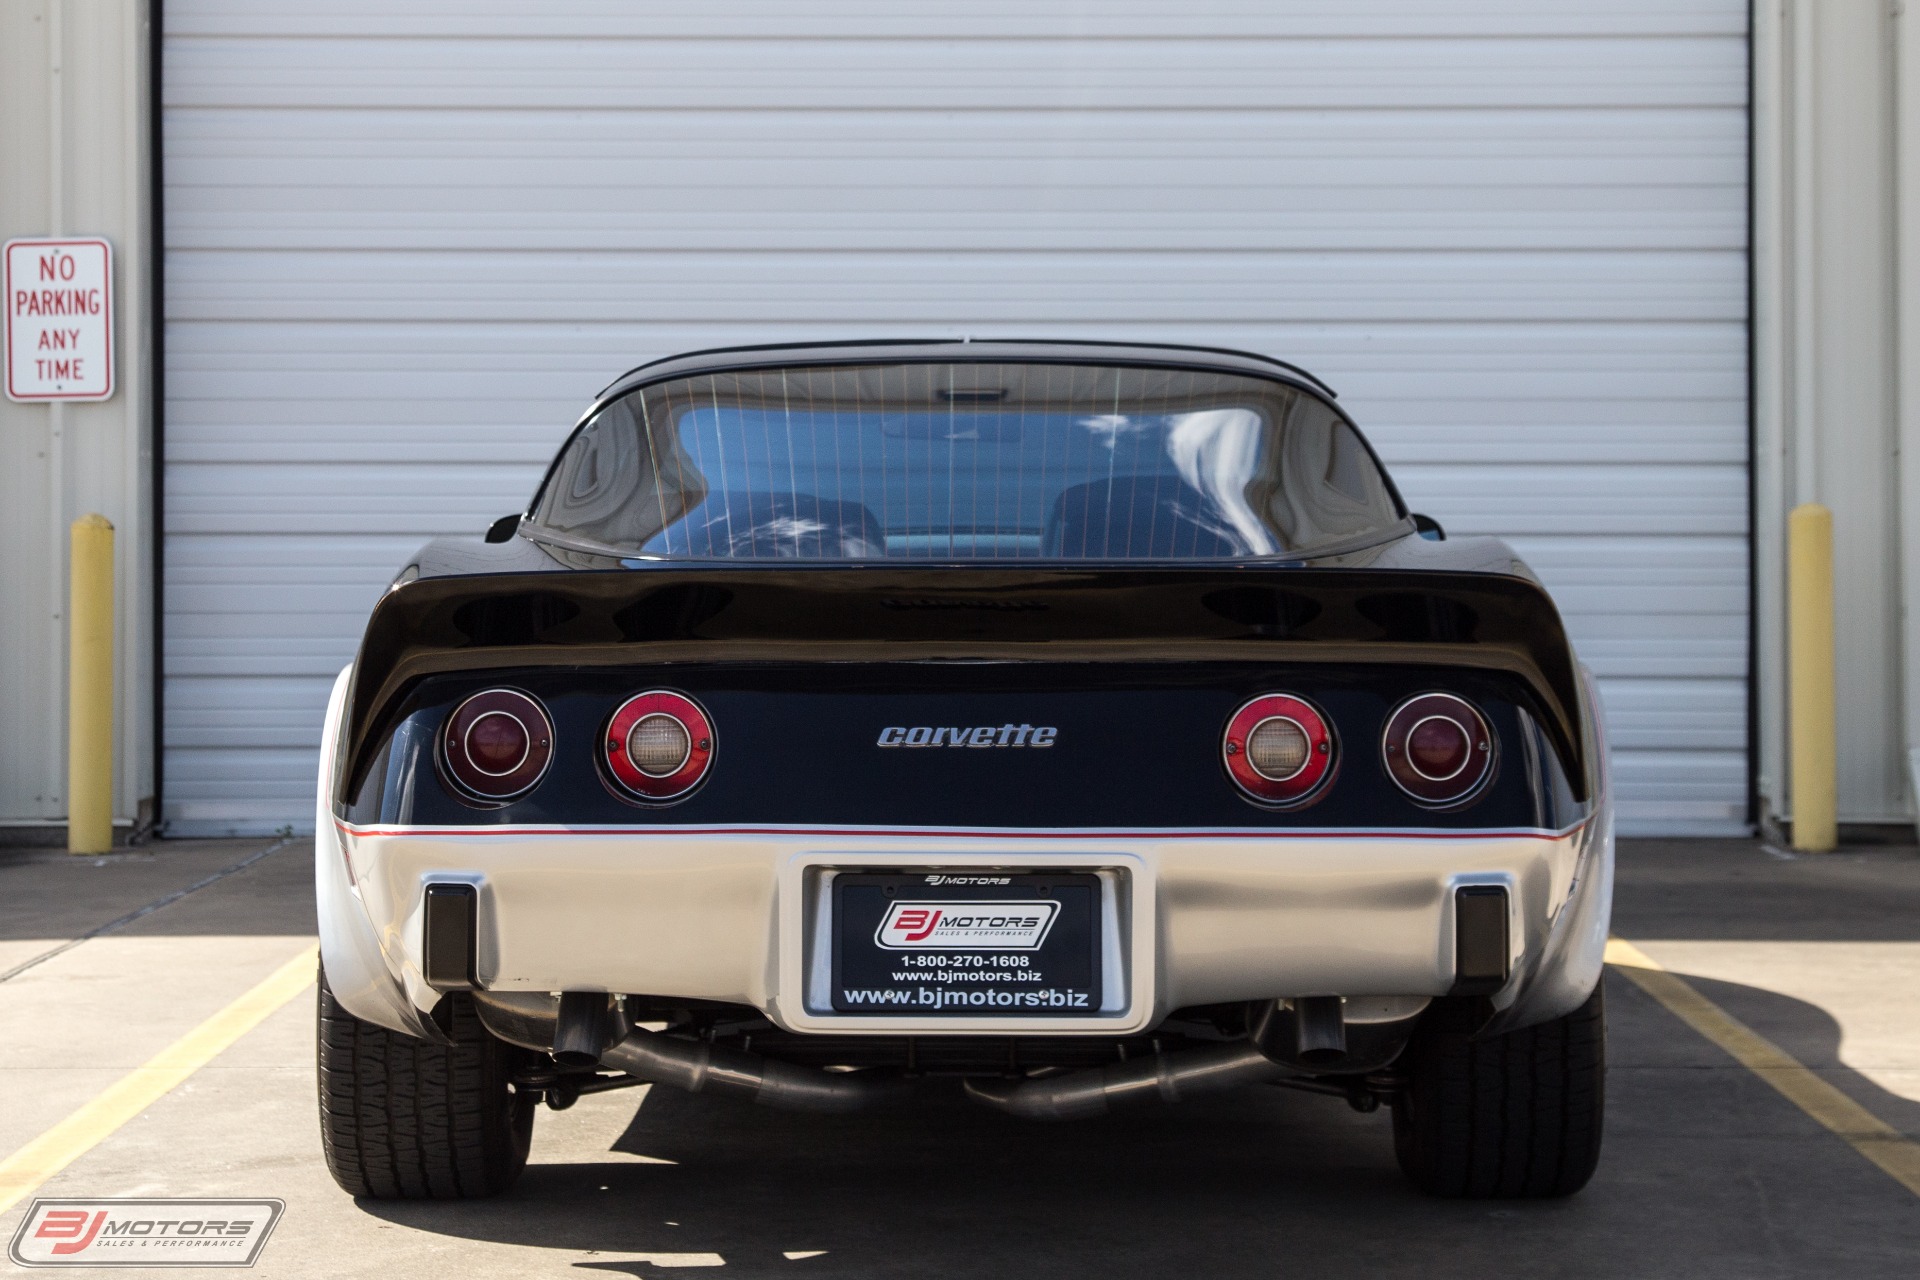 Used-1978-Chevrolet-Corvette-Indy-Pace-Car